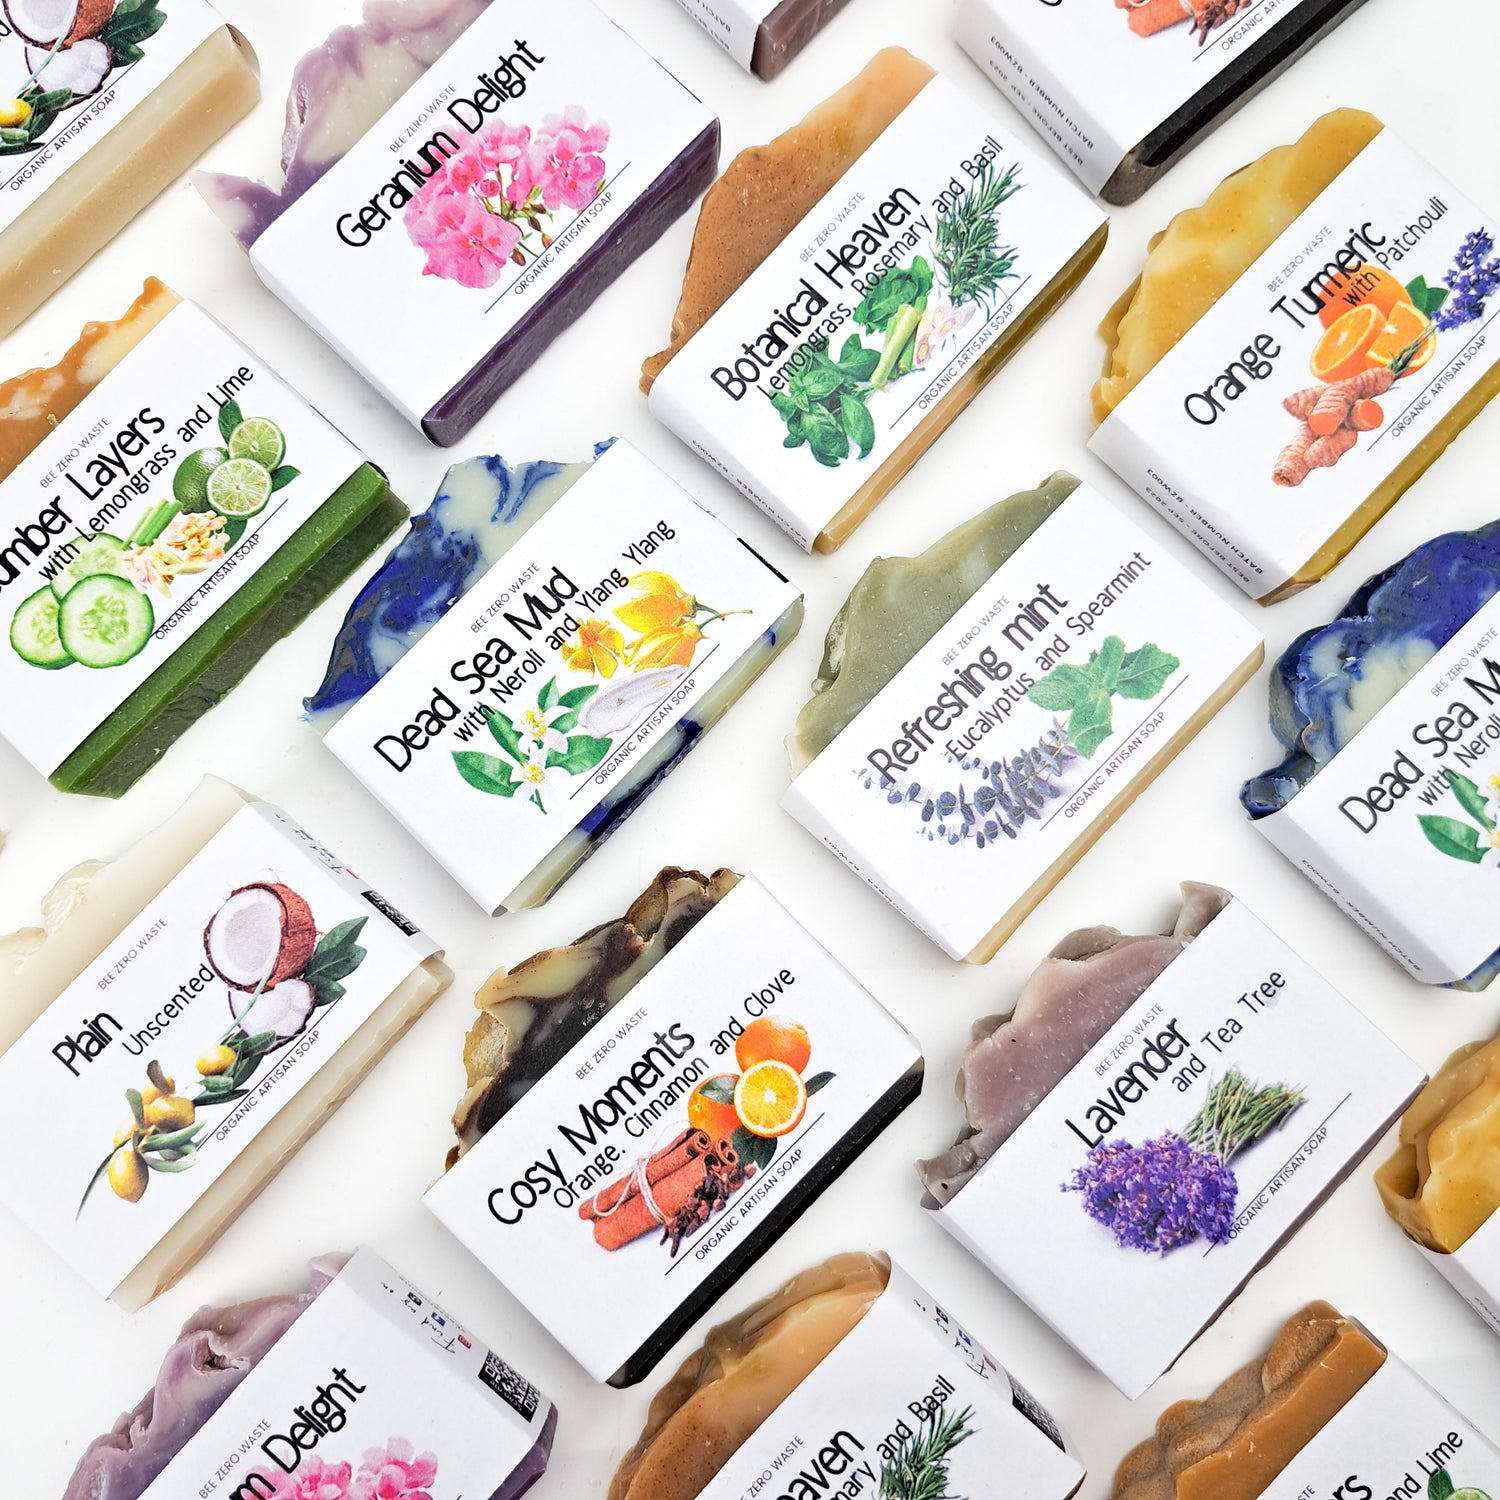 Handcrafted natural soaps with botanicals, cold-processed and scented with essential oils, displayed on a rustic wooden surface, highlighting their organic beauty